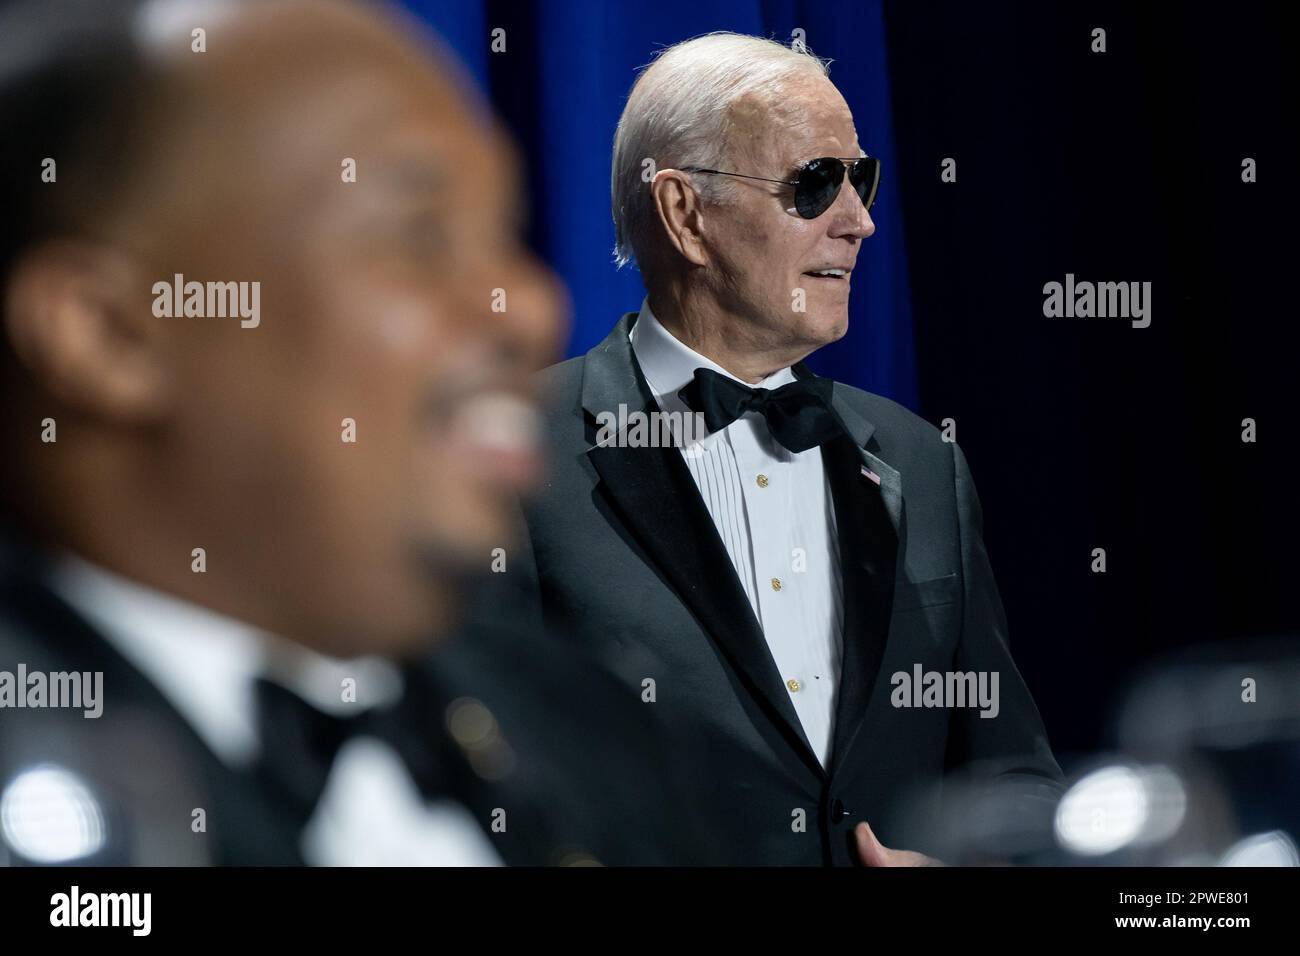 Washington DC, USA. 29th Apr, 2023. US President Joe Biden watches during the White House Correspondents' Association (WHCA) dinner in Washington, DC on Saturday, April 29, 2023. The annual dinner raises money for WHCA scholarships and honors the recipients of the organization's journalism awards. Photo by : Nathan Howard/UPI Credit: UPI/Alamy Live News Stock Photo